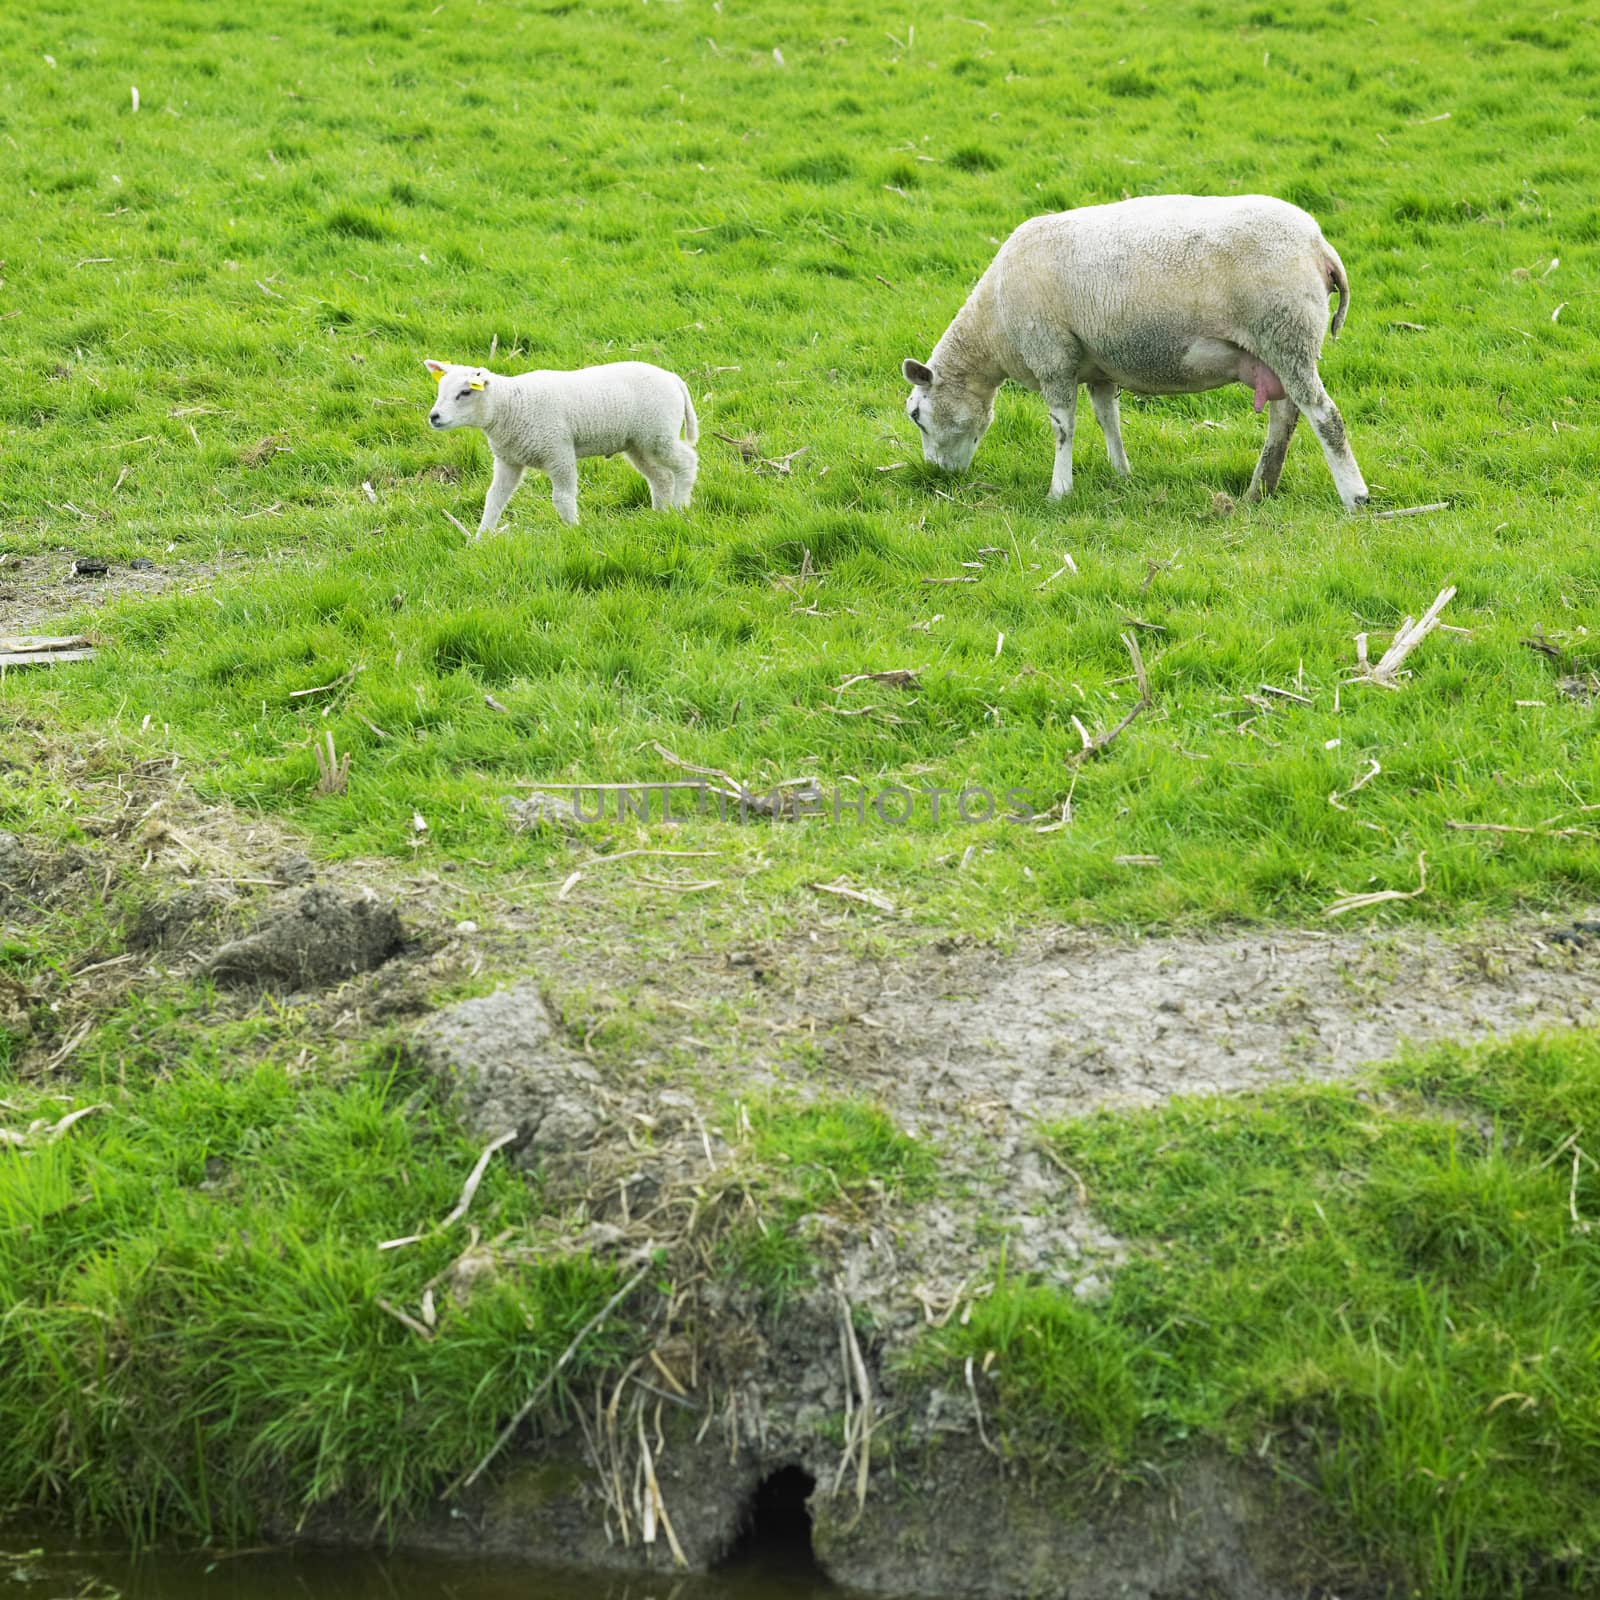 sheep with a lamb, Netherlands